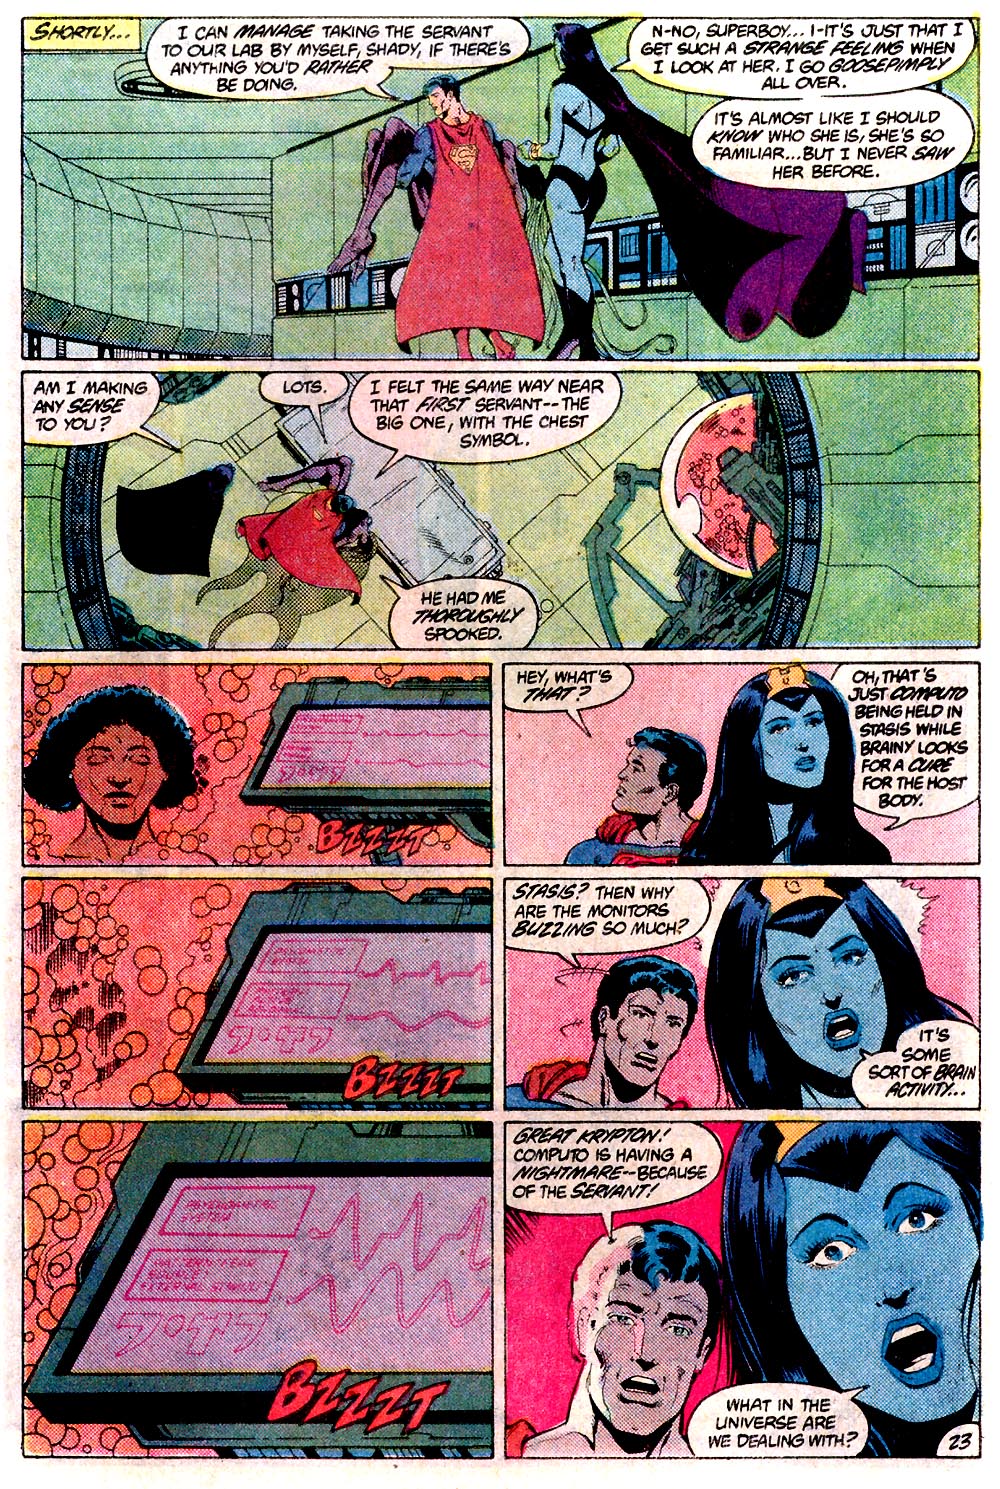 Legion of Super-Heroes (1980) 290 Page 23